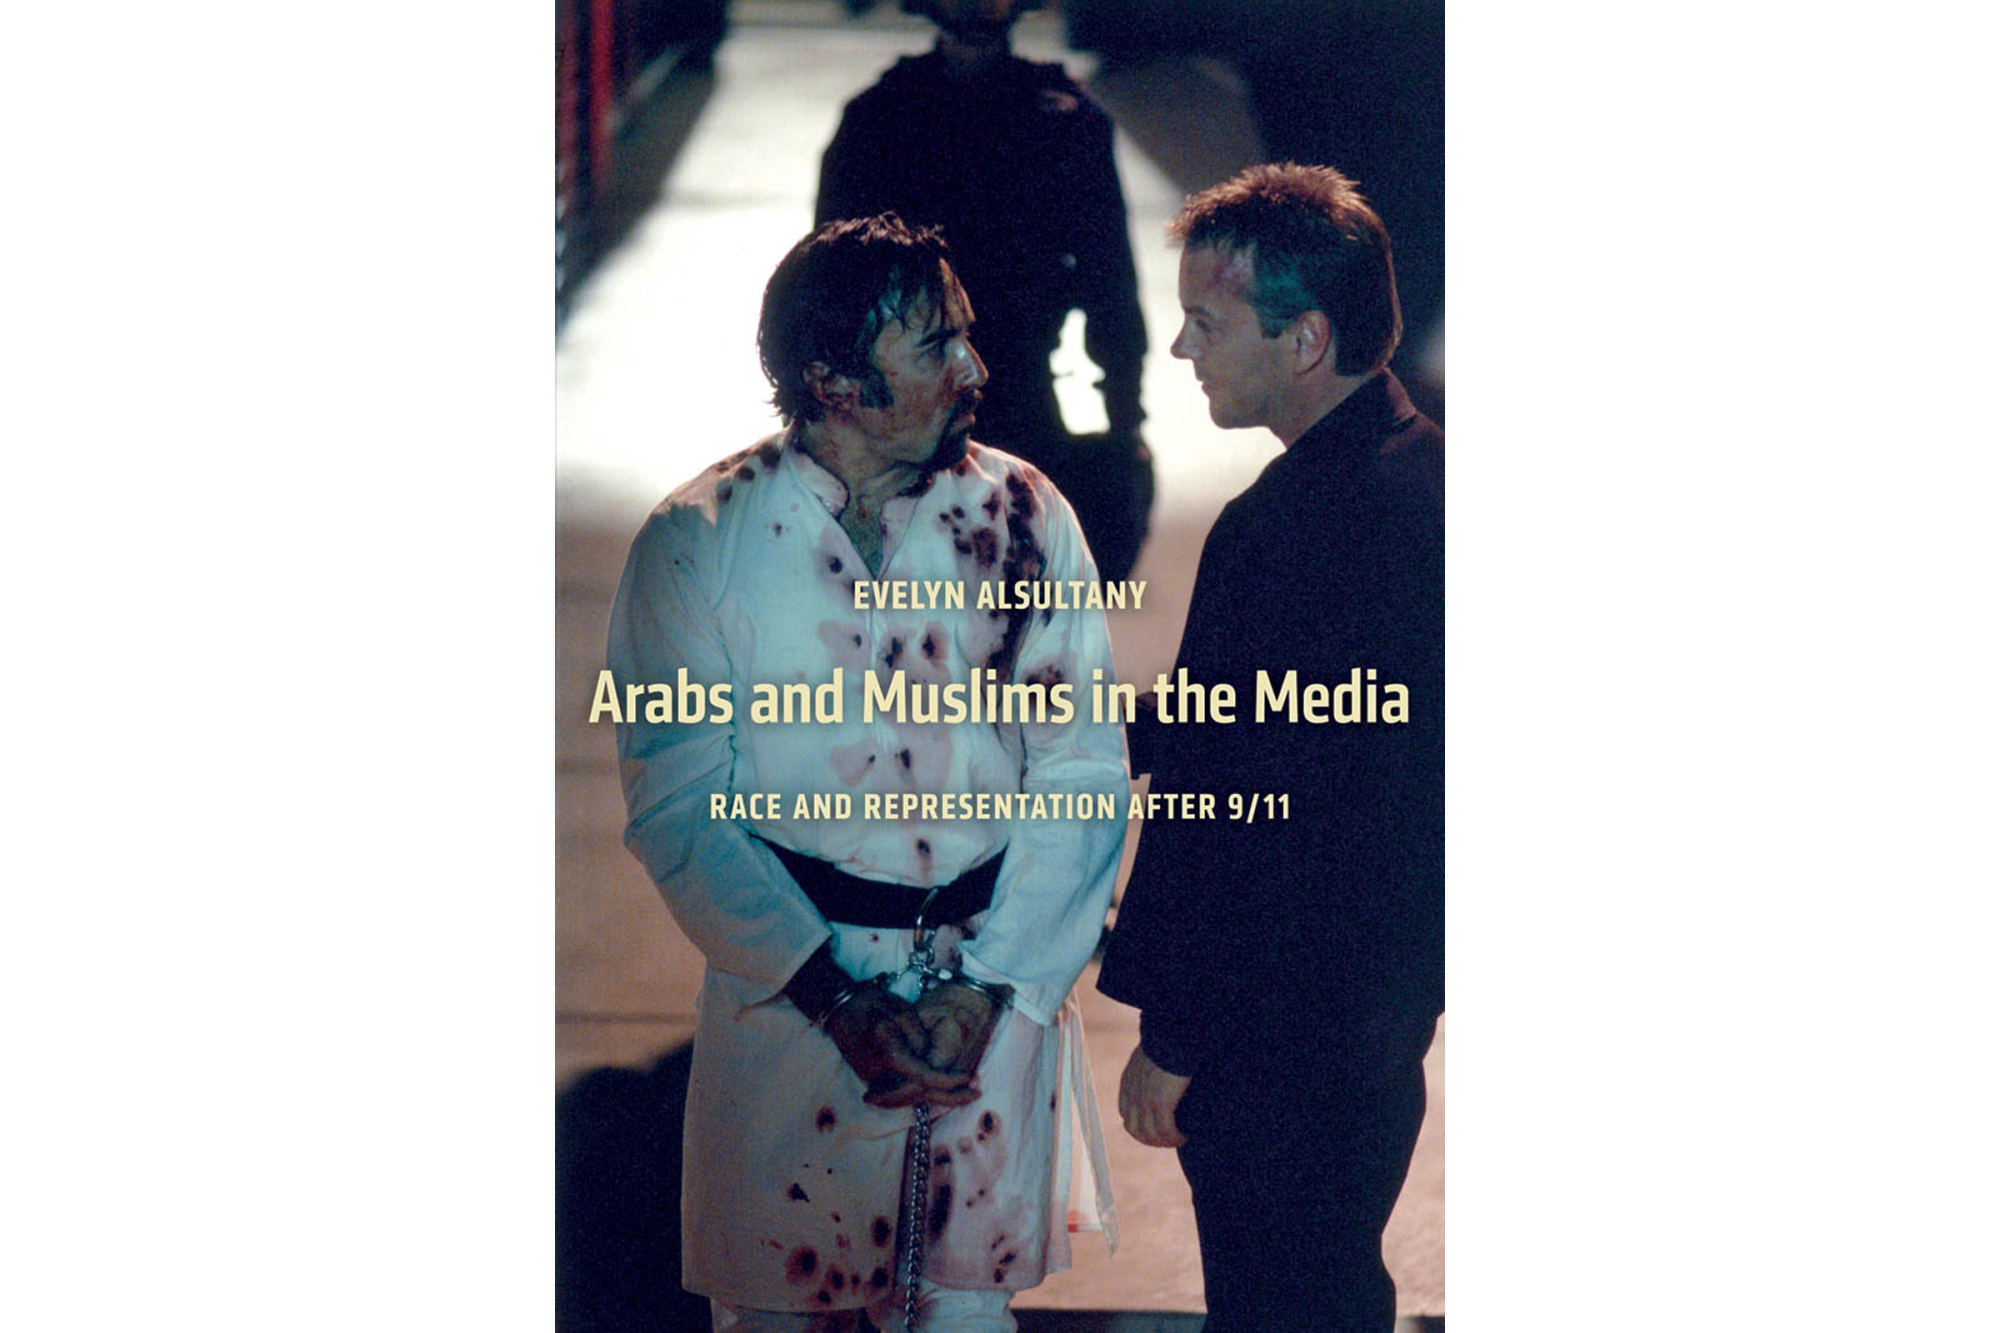 "Arabs and Muslims in the Media: Race and Representation after 9/11" by Evelyn Alsultany